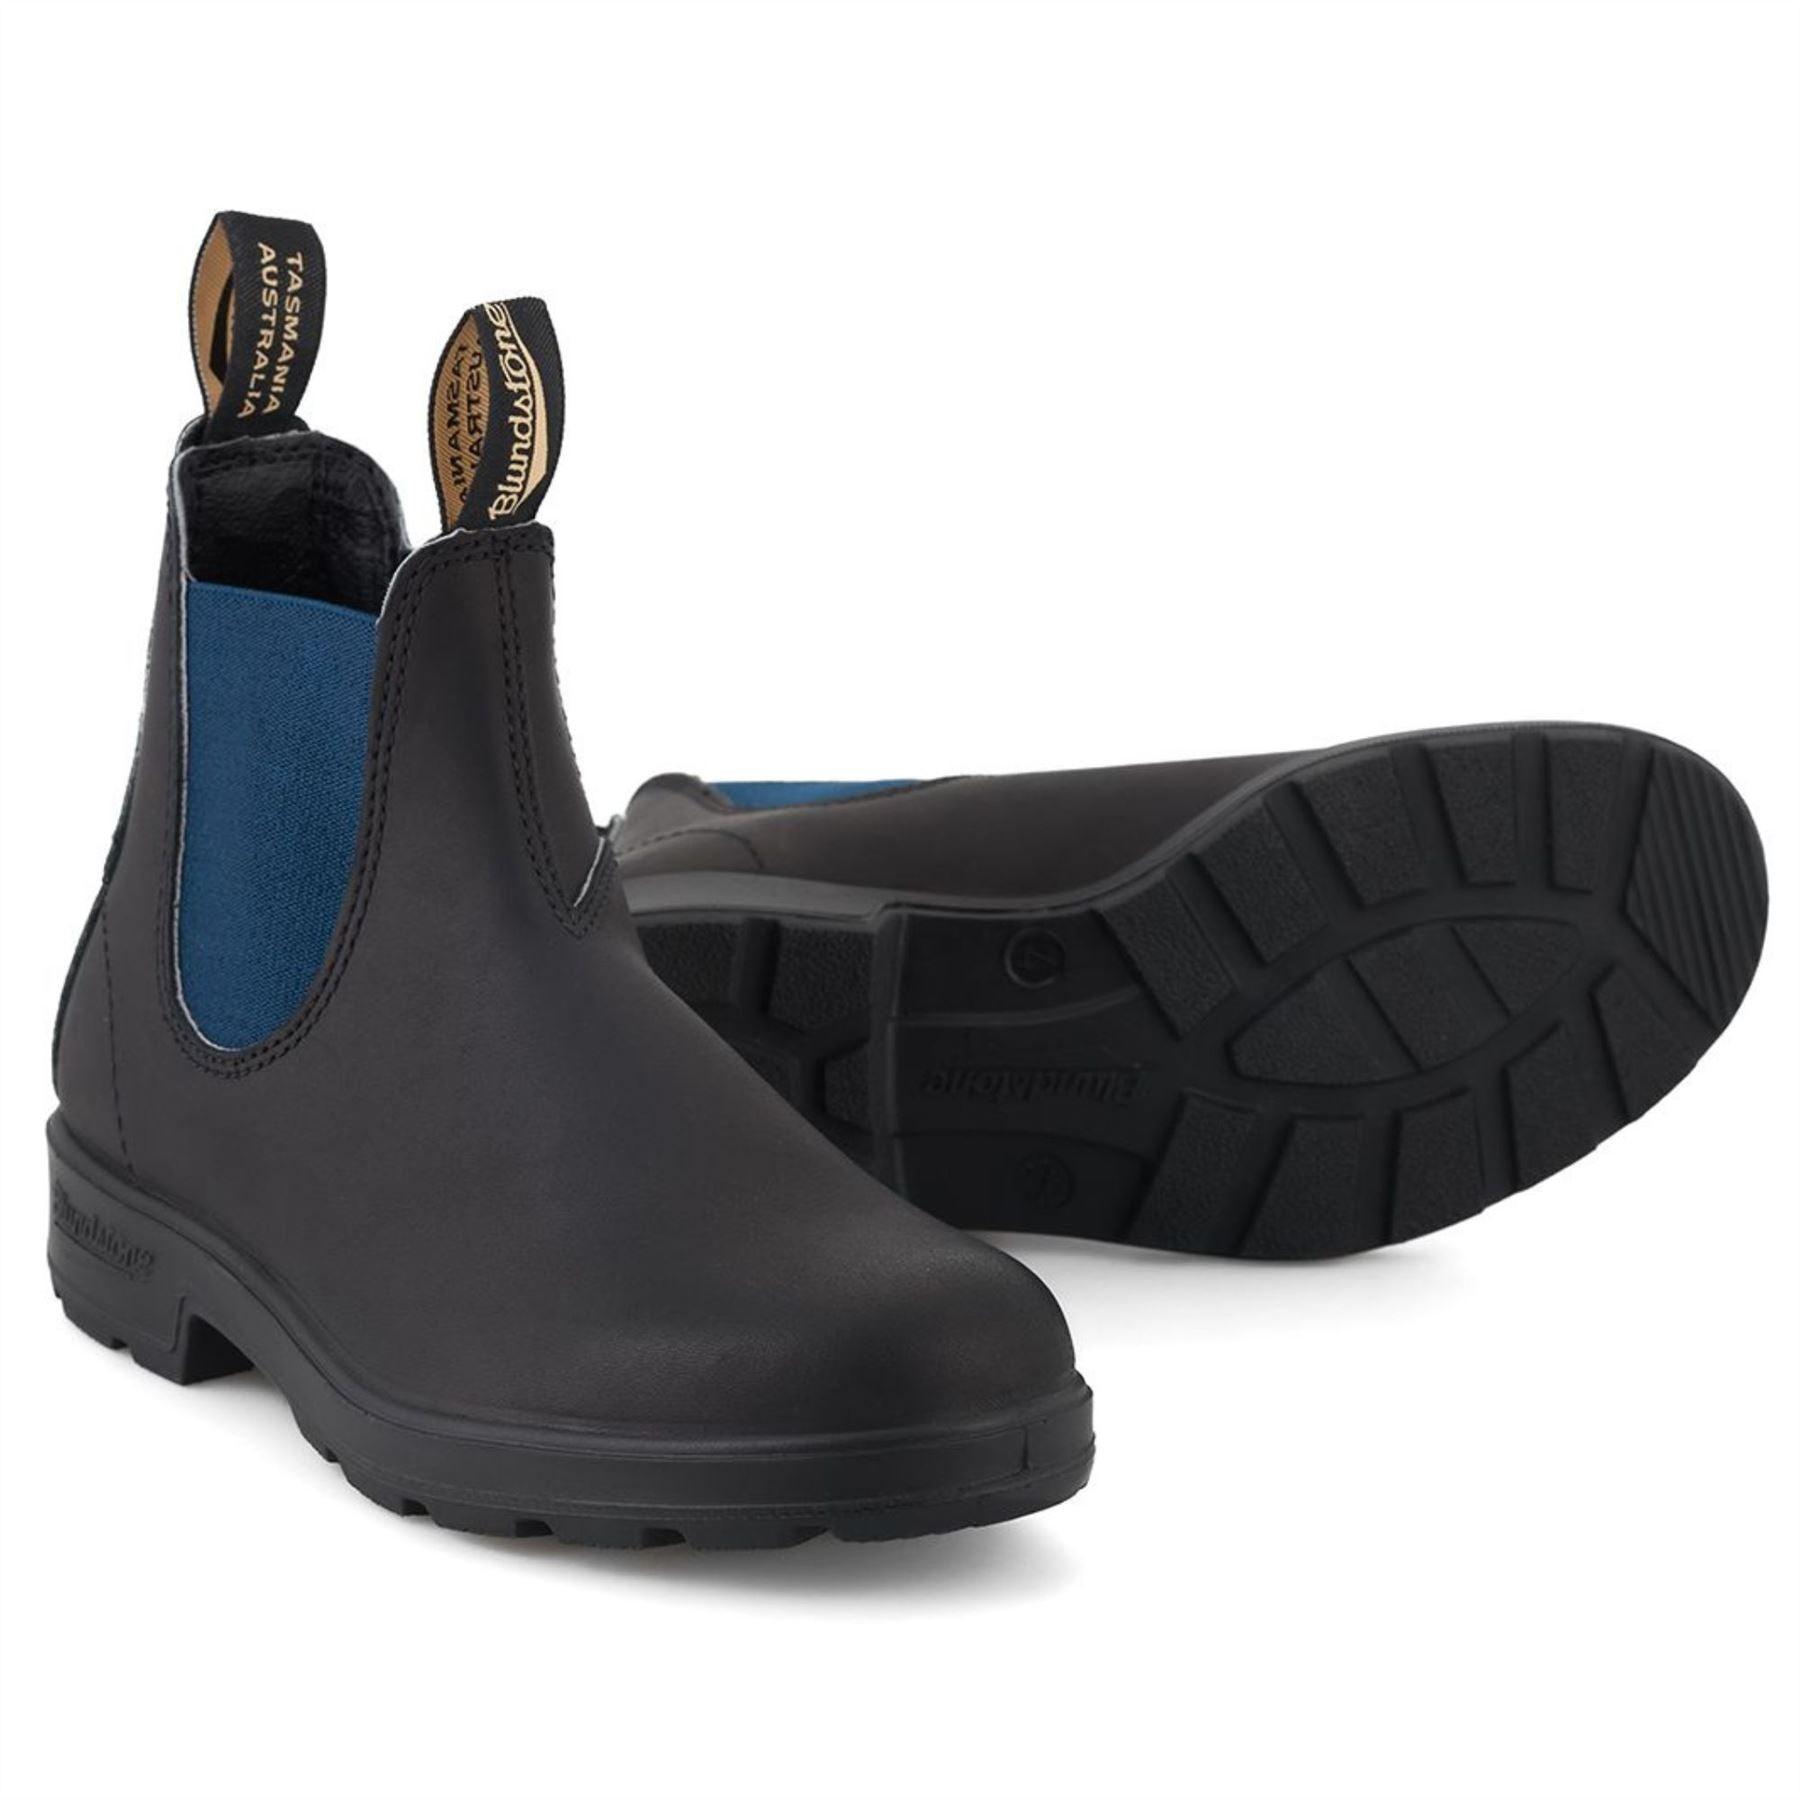 Blundstone 1917 Black Navy Blue Leather Chelsea Boots Ankle Classic Slip On - Knighthood Store